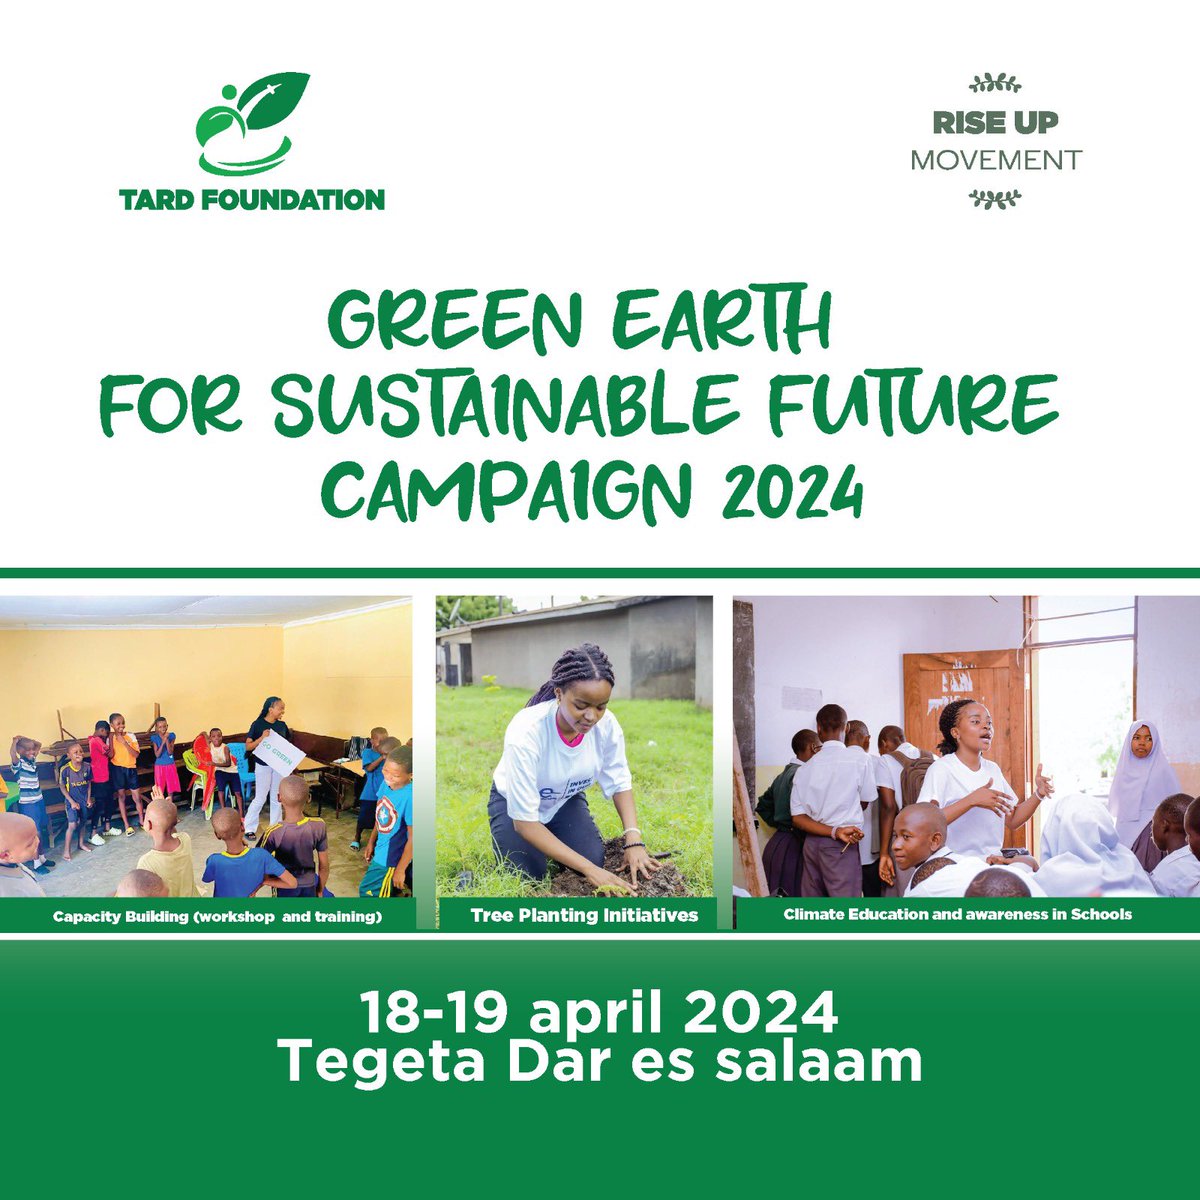 I’m so excited for our GREEN EARTH FOR SUSTAINABLE FUTURE CAMPAIGN 2024 A campaign is designed to promote Environmental Sustainability through Climate education and tree planting in schools. #JustTransition24 #Riseupmovement